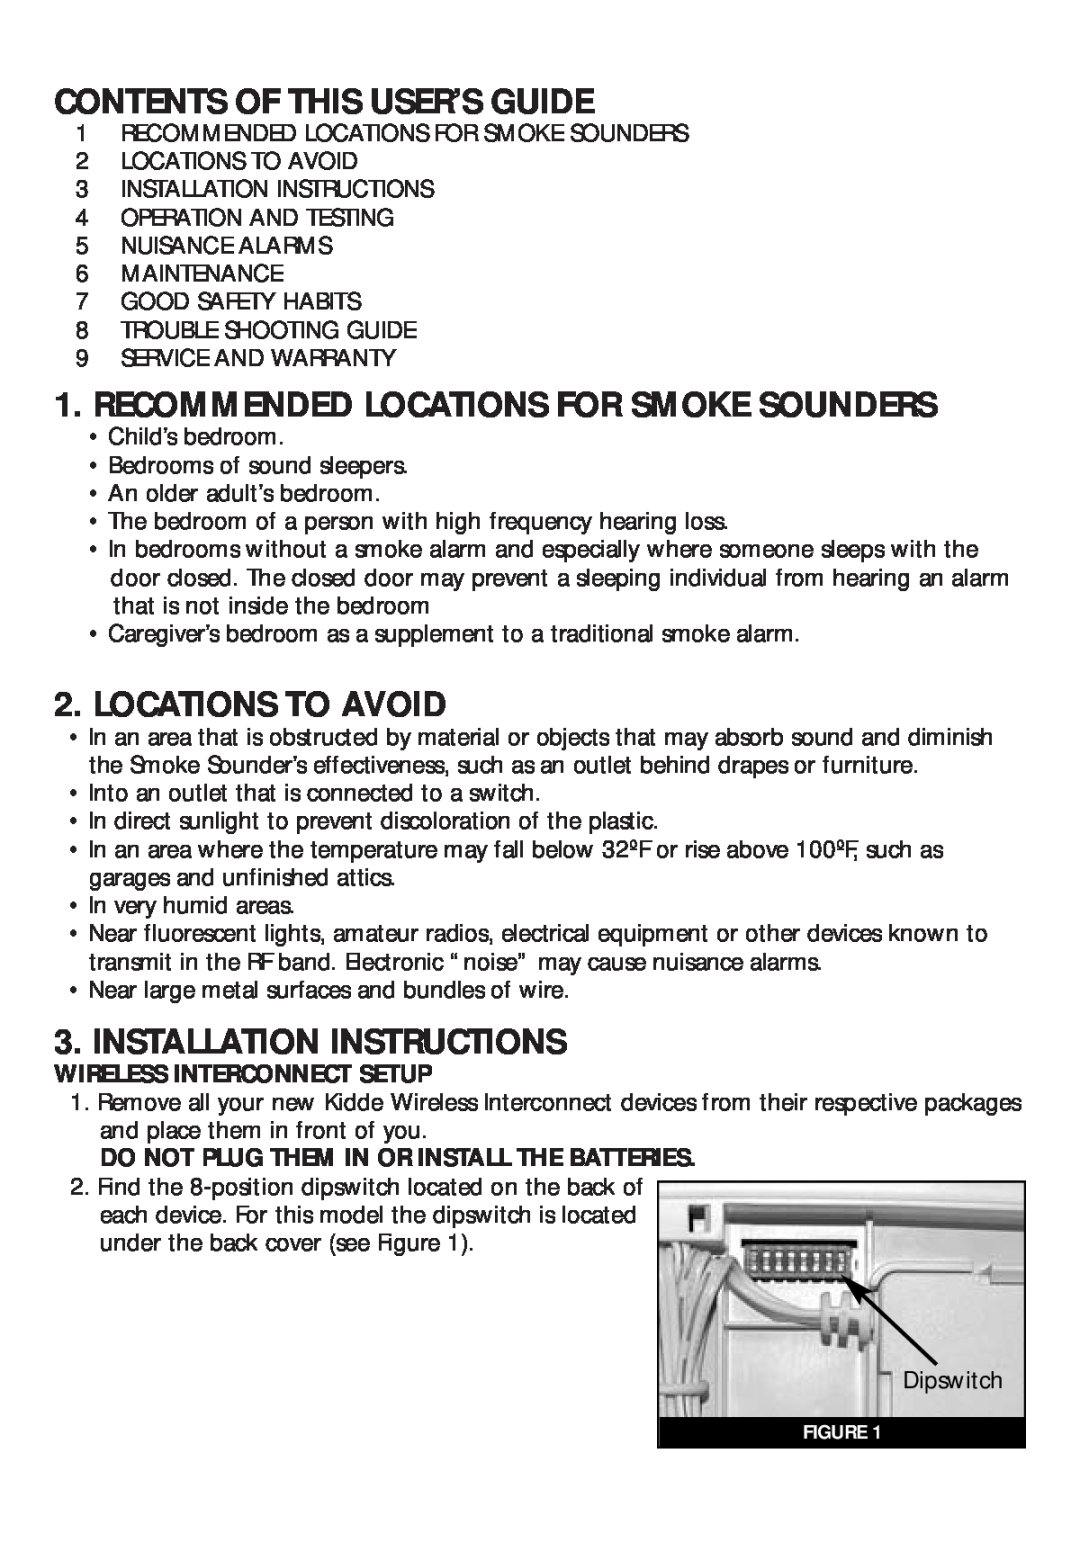 Kidde RF-SND manual Contents Of This User’S Guide, Recommended Locations For Smoke Sounders, Locations To Avoid 